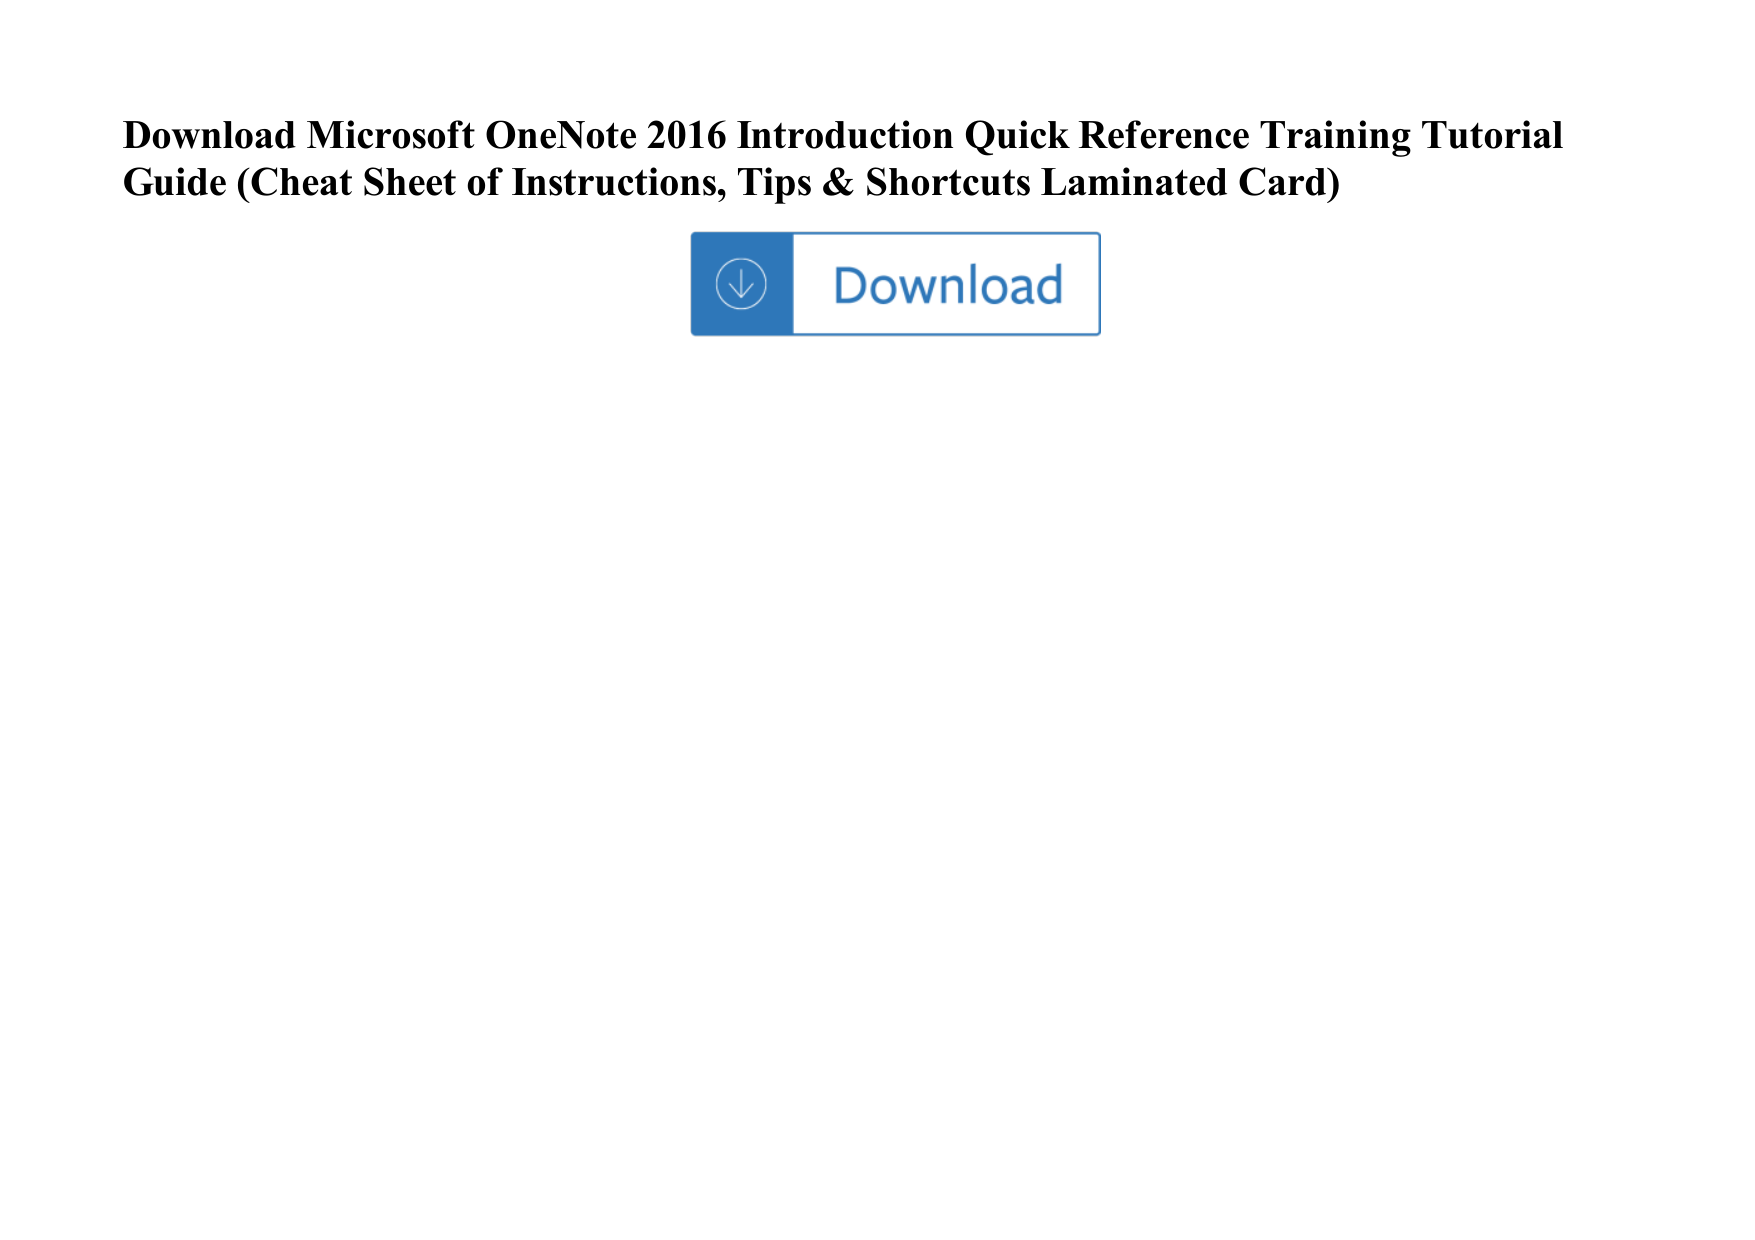 Page 1 of 1 - Microsoft OneNote 2016 Introduction Quick Reference Training Tutorial Guide (Cheat Sheet Of Instructions, Tips & Shortcuts  Microsoft-onenote-2016-introduction-quick-reference-training-tutorial-guide-cheat-sheet-of-instructions-tips-shortcuts-laminated